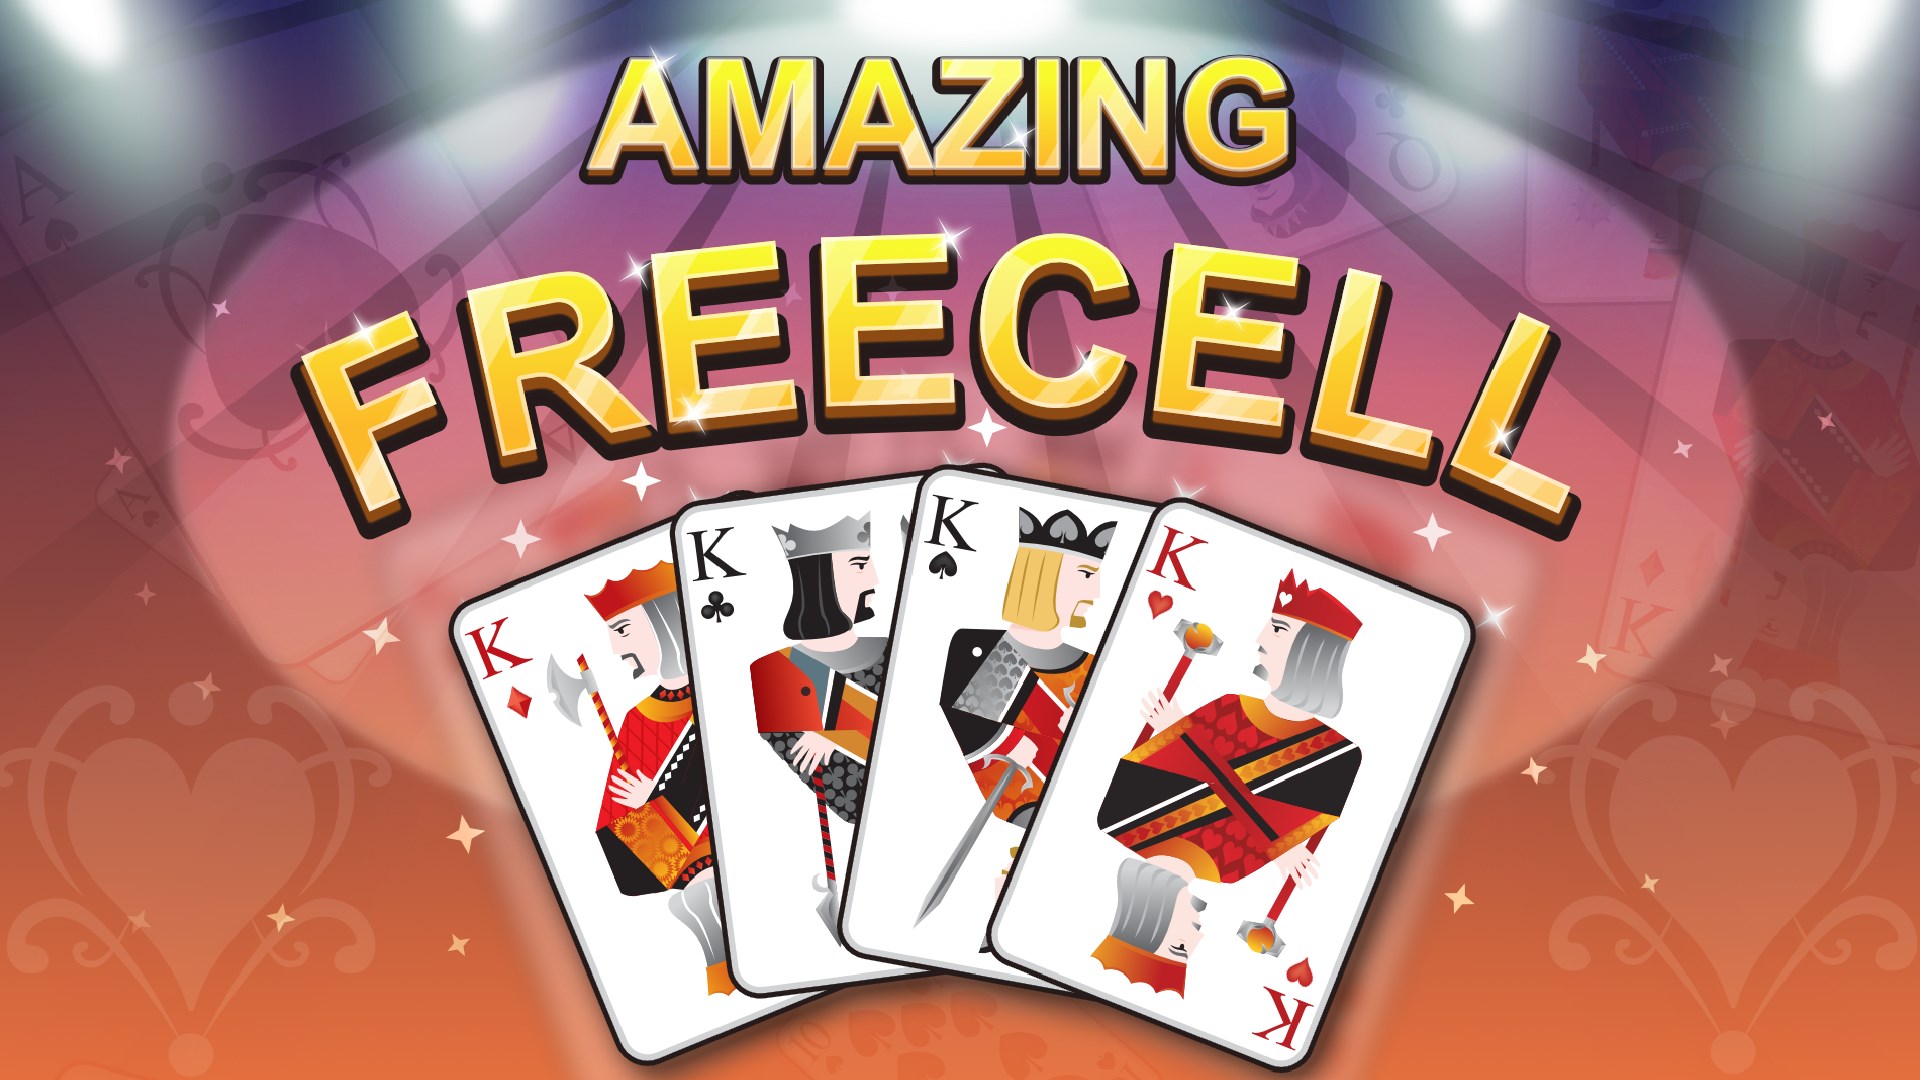 Get FreeCell Solitaire!! - Microsoft Store